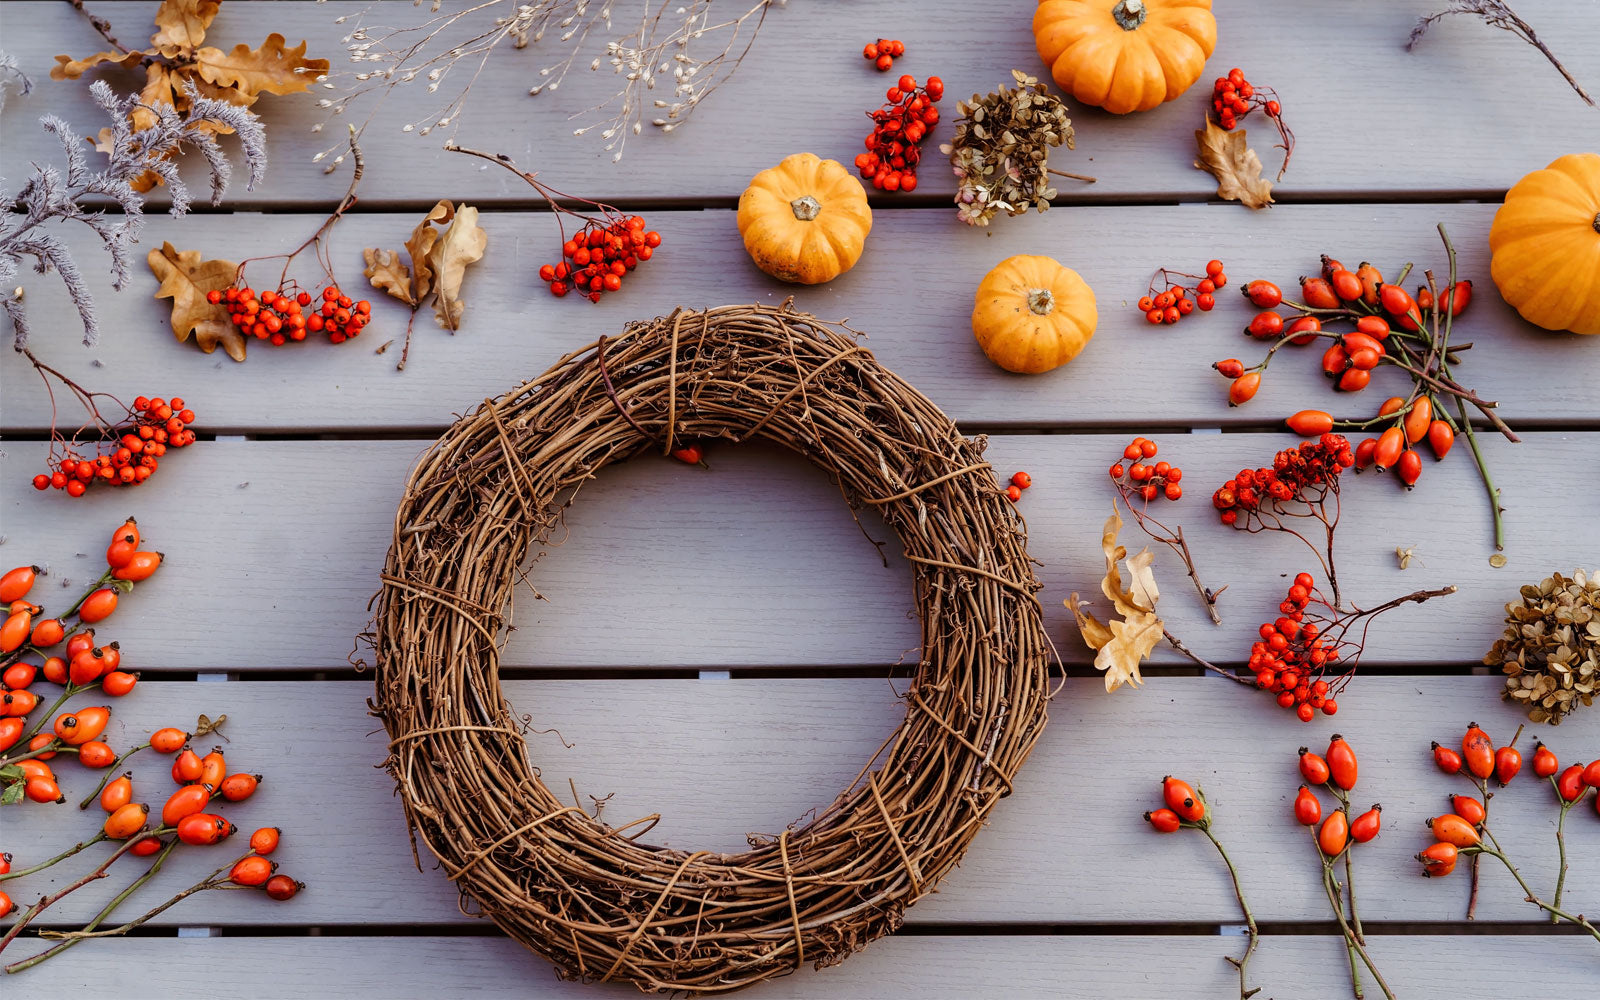 How to Make A Fall Wreath to Decorate Your Home